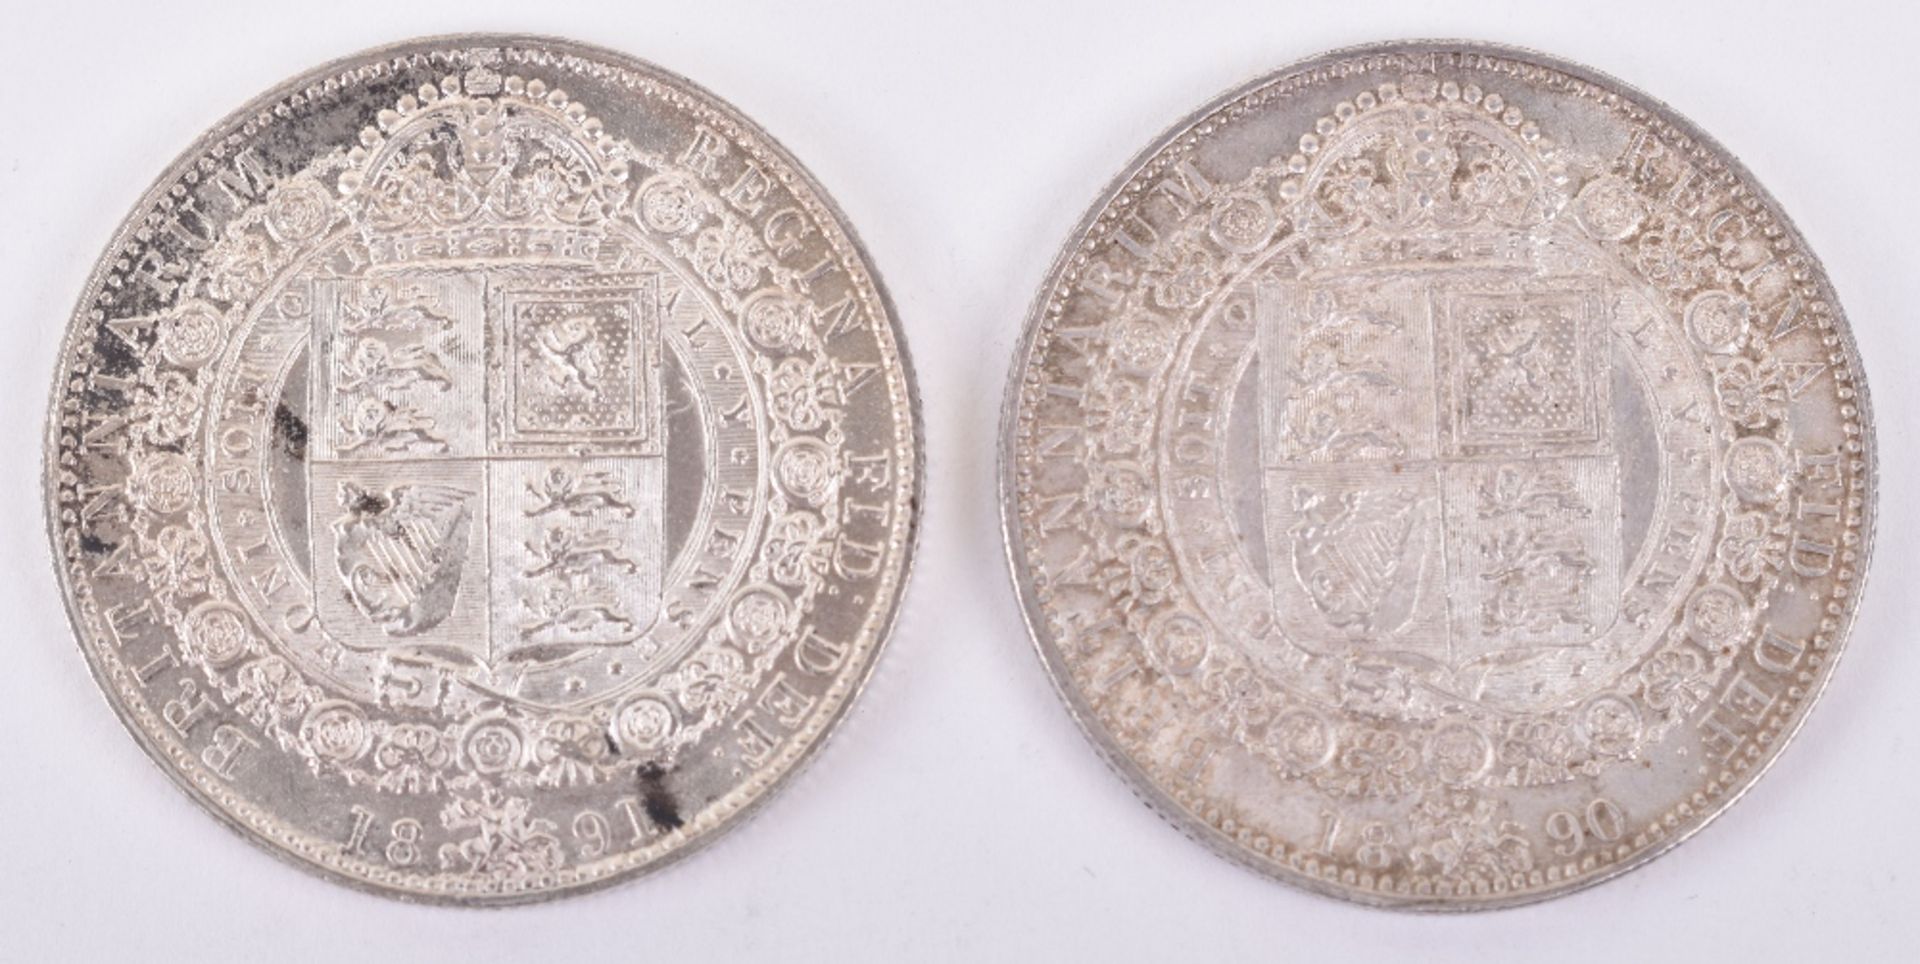 Victoria Halfcrown 1890 and 1891 - Image 2 of 2